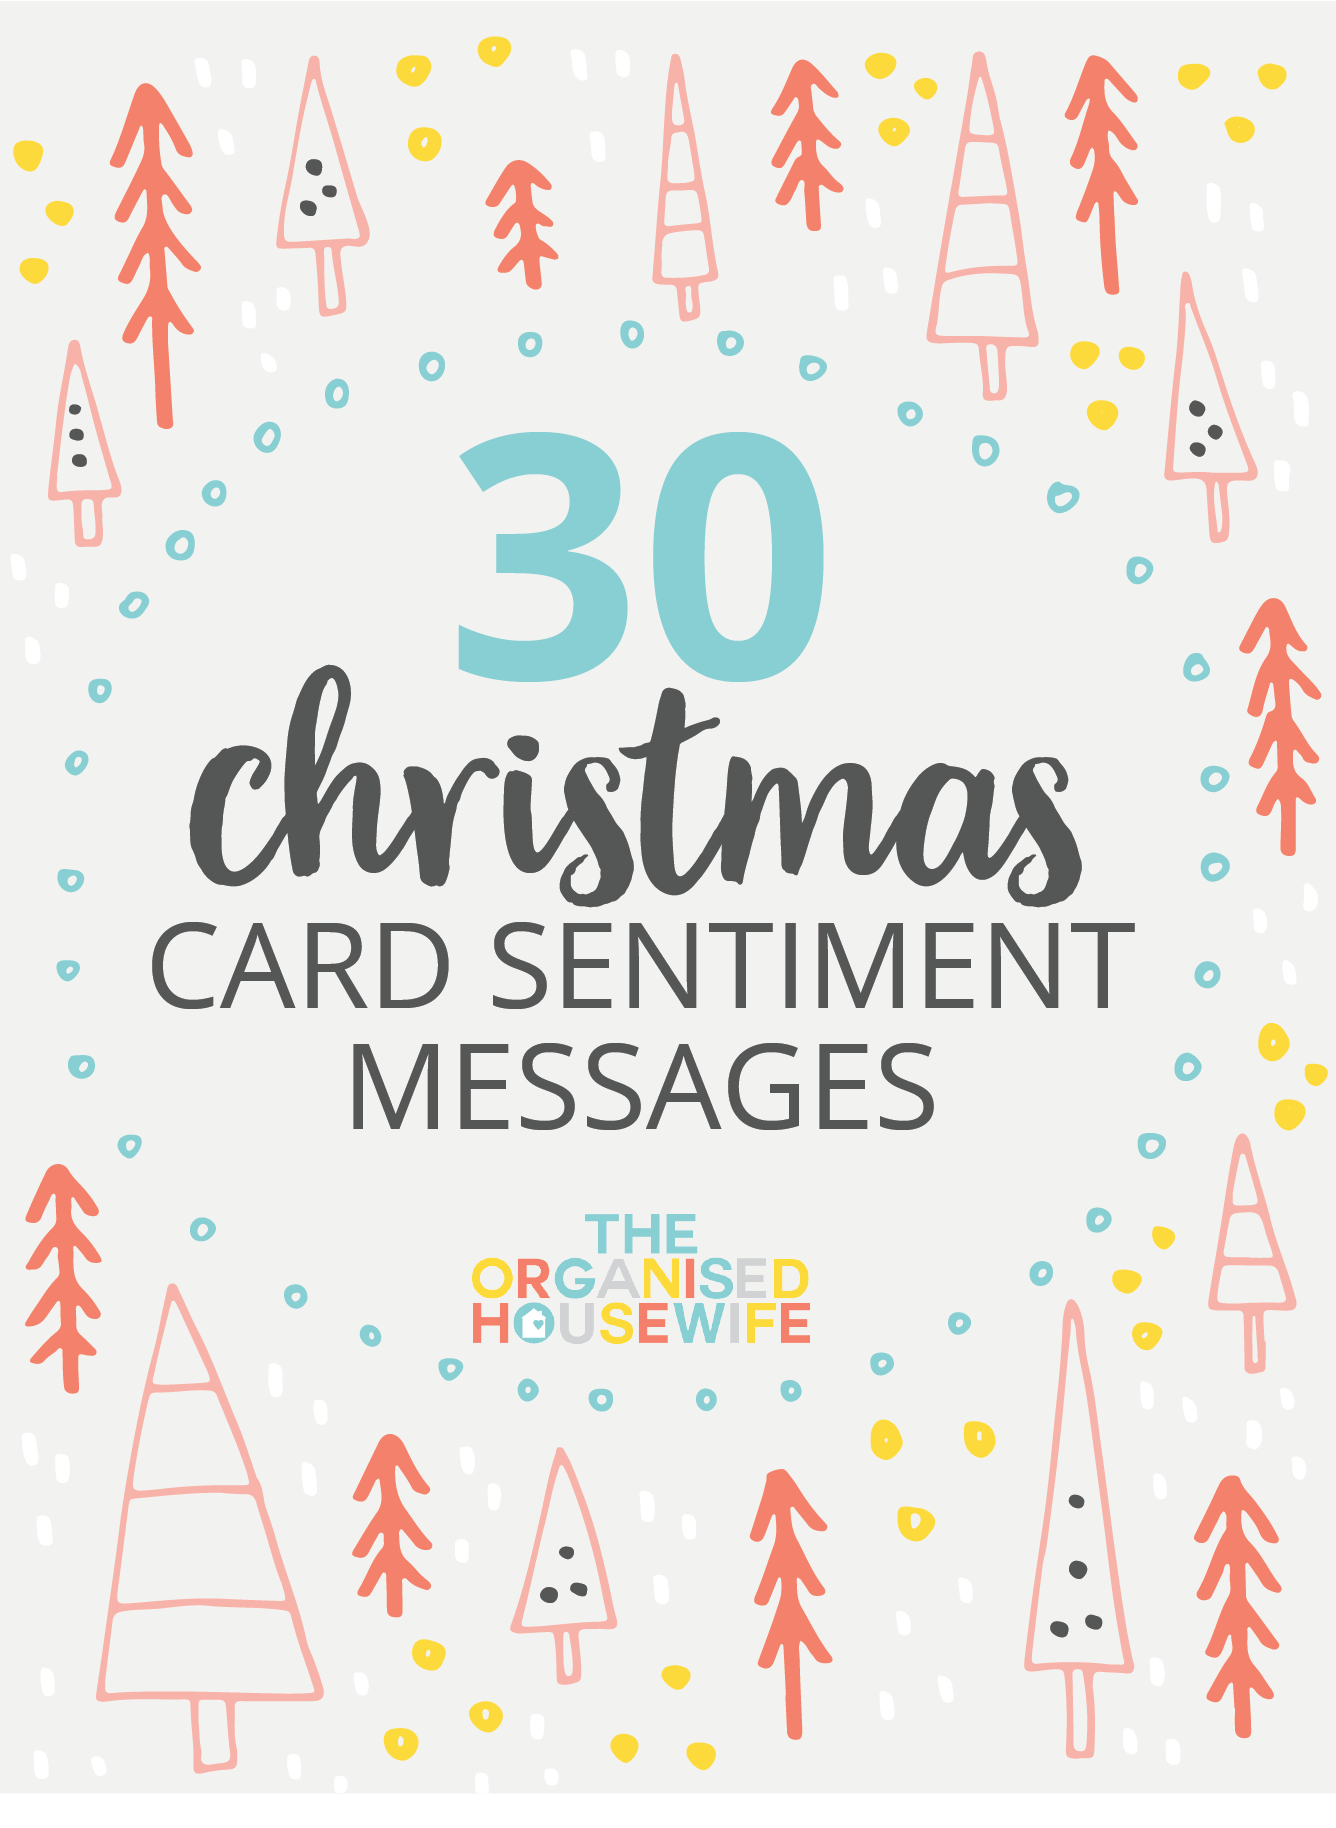 30 CHRISTMAS CARD SENTIMENT MESSAGES The Organised Housewife